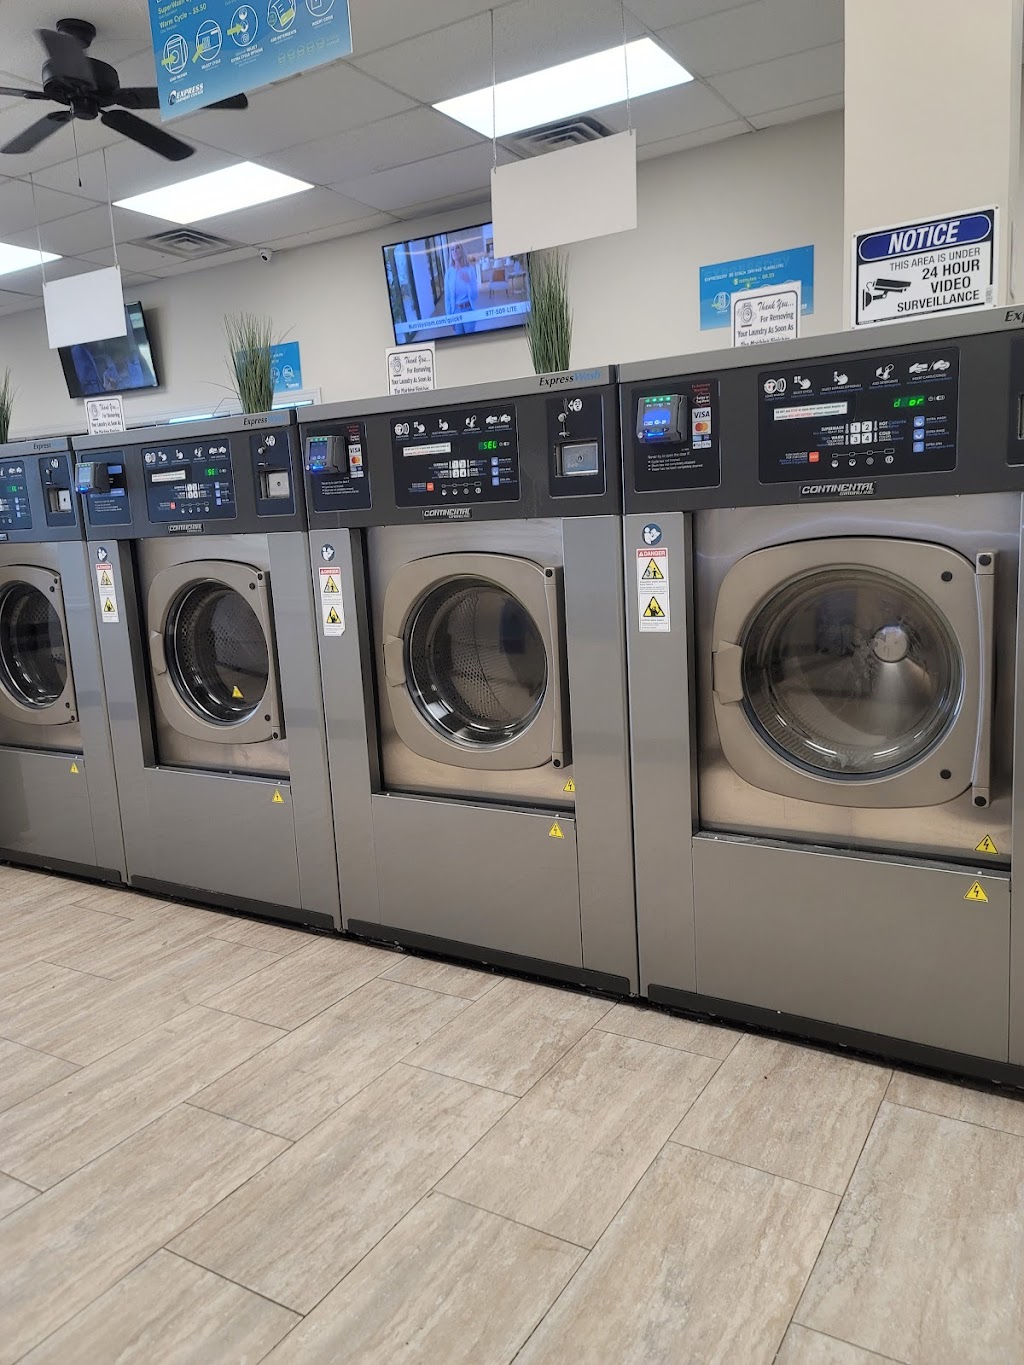 Express Laundromat | 107 Kinsley Dr, Brodheadsville, PA 18322 | Phone: (570) 402-2777